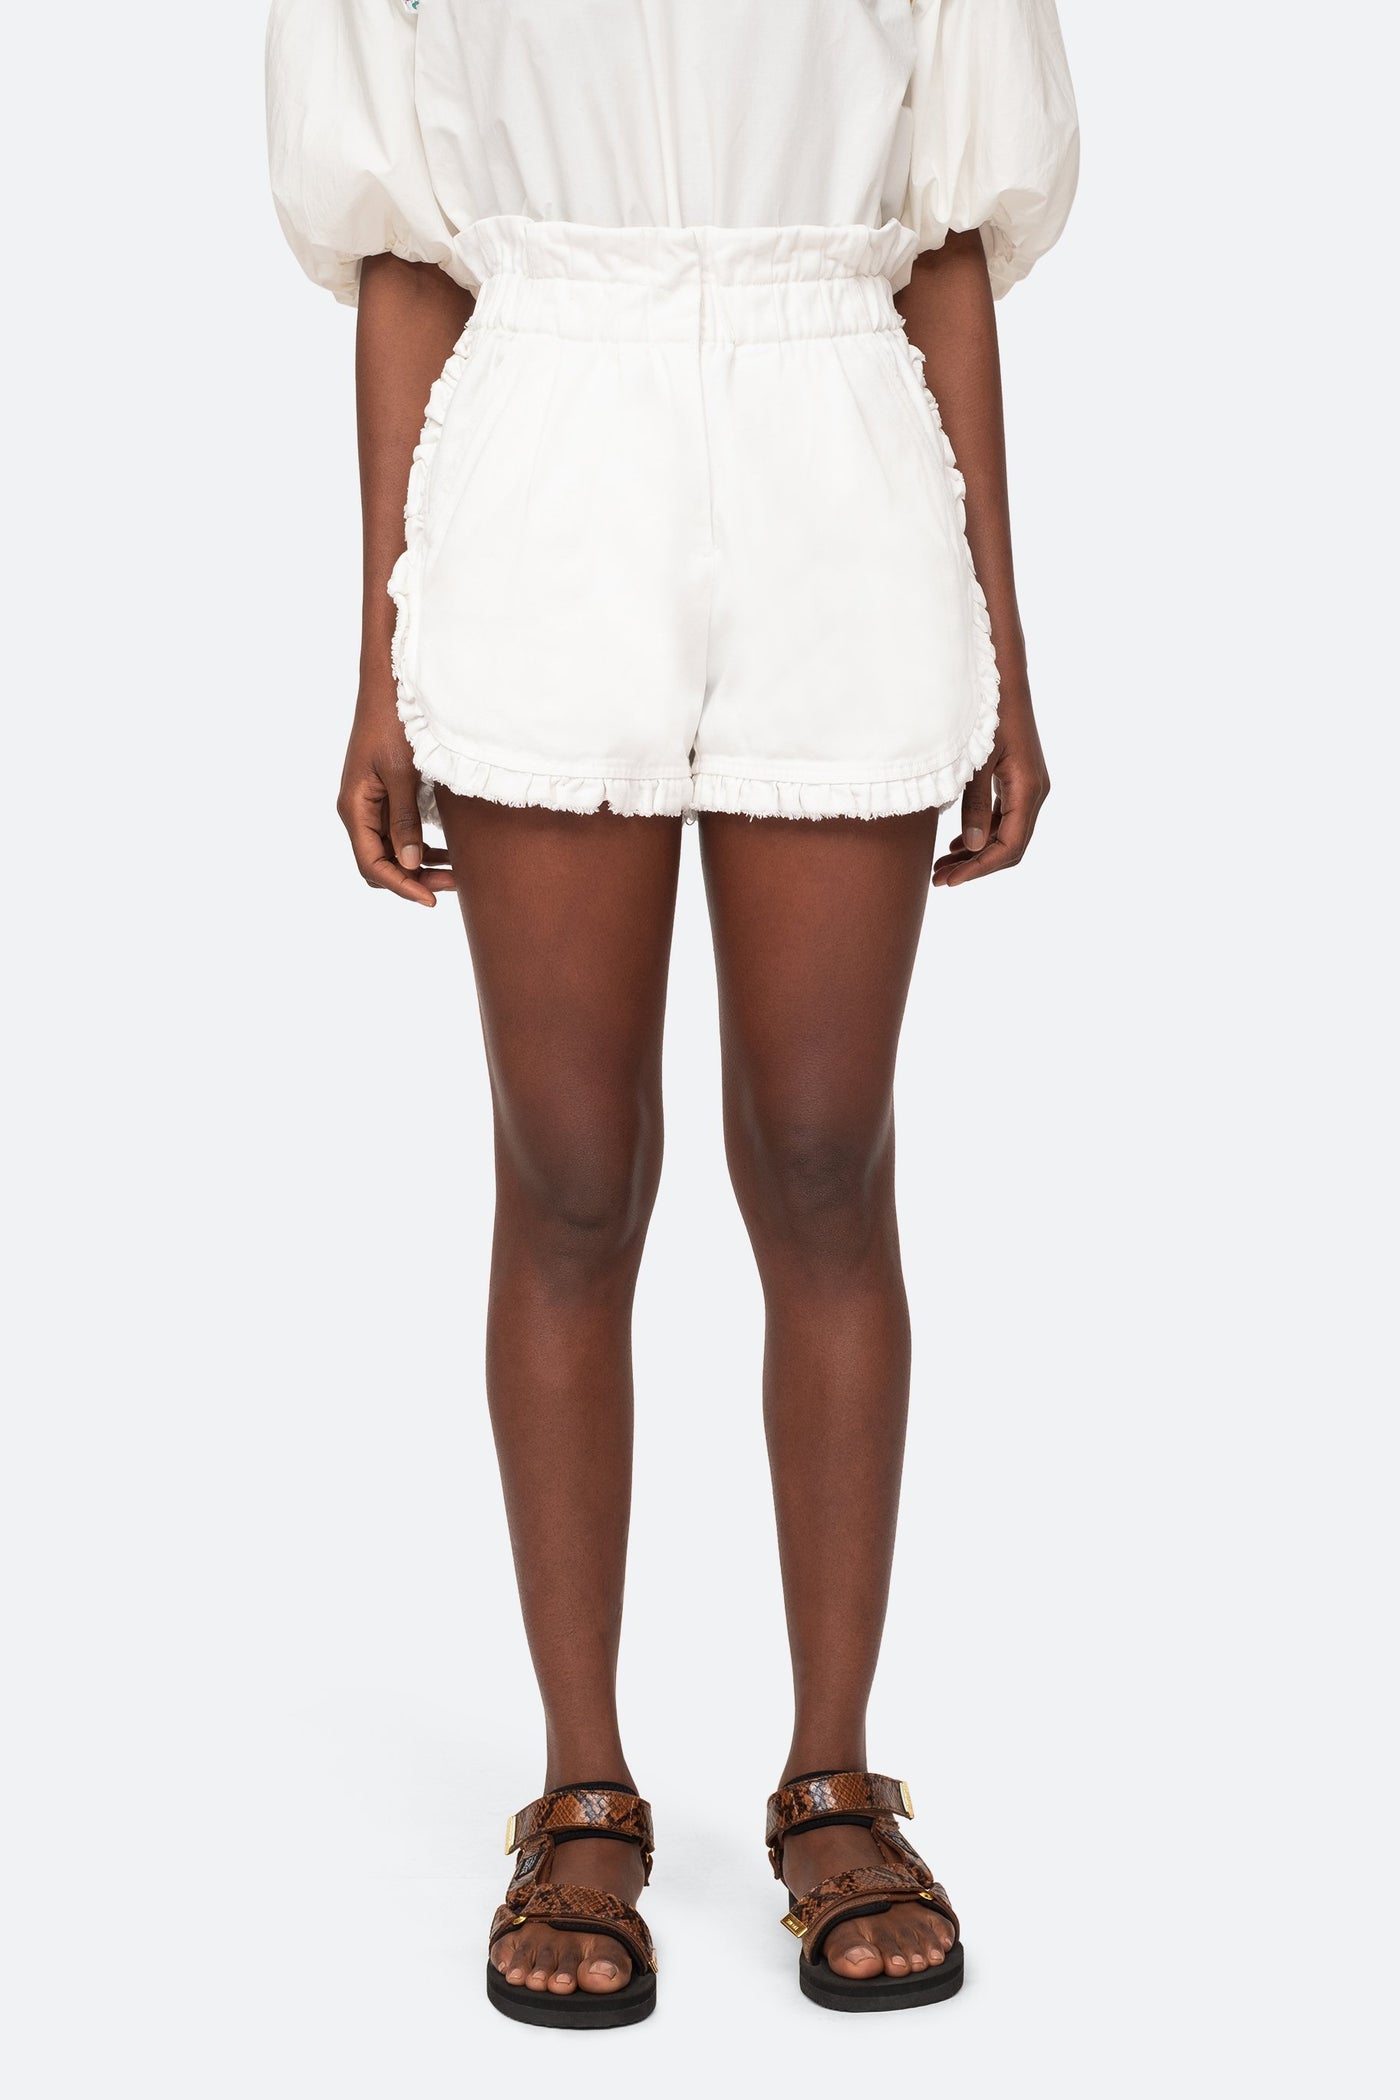 Ruffle Acid Shorts - More Colors Available